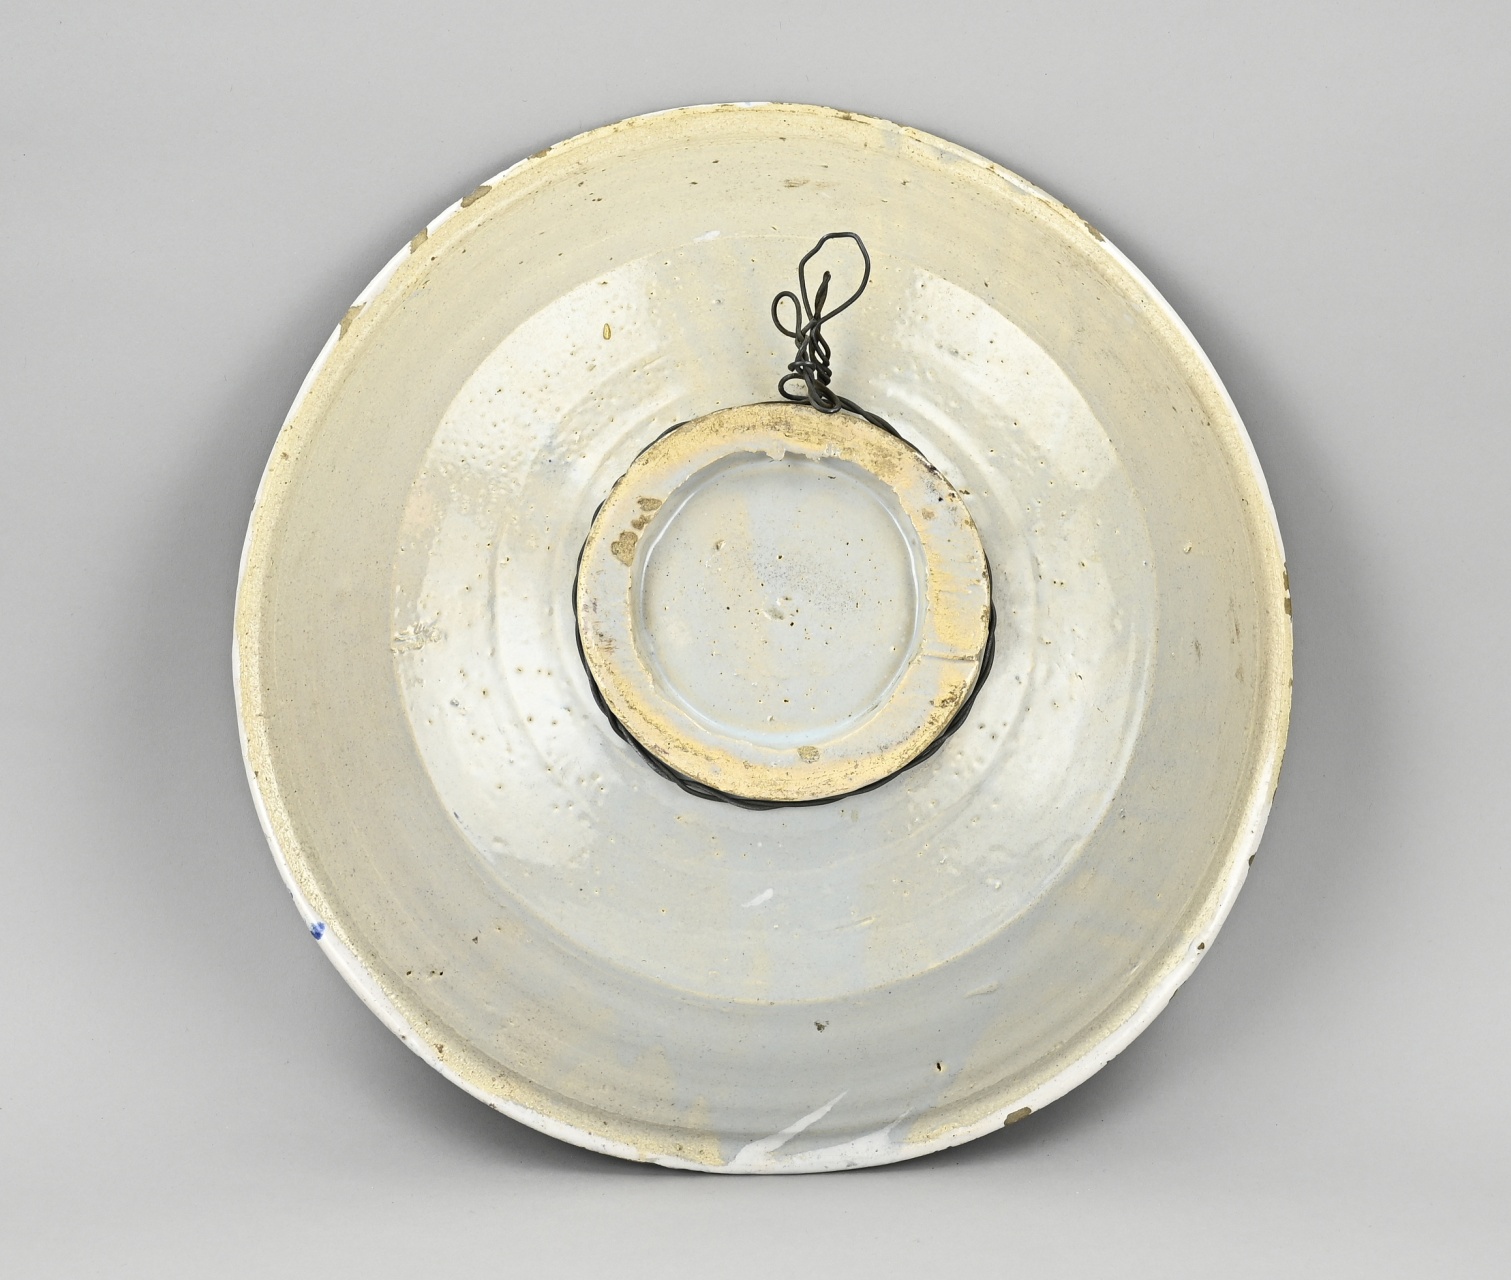 Dish with saying Ã˜ 36 cm. - Image 2 of 2